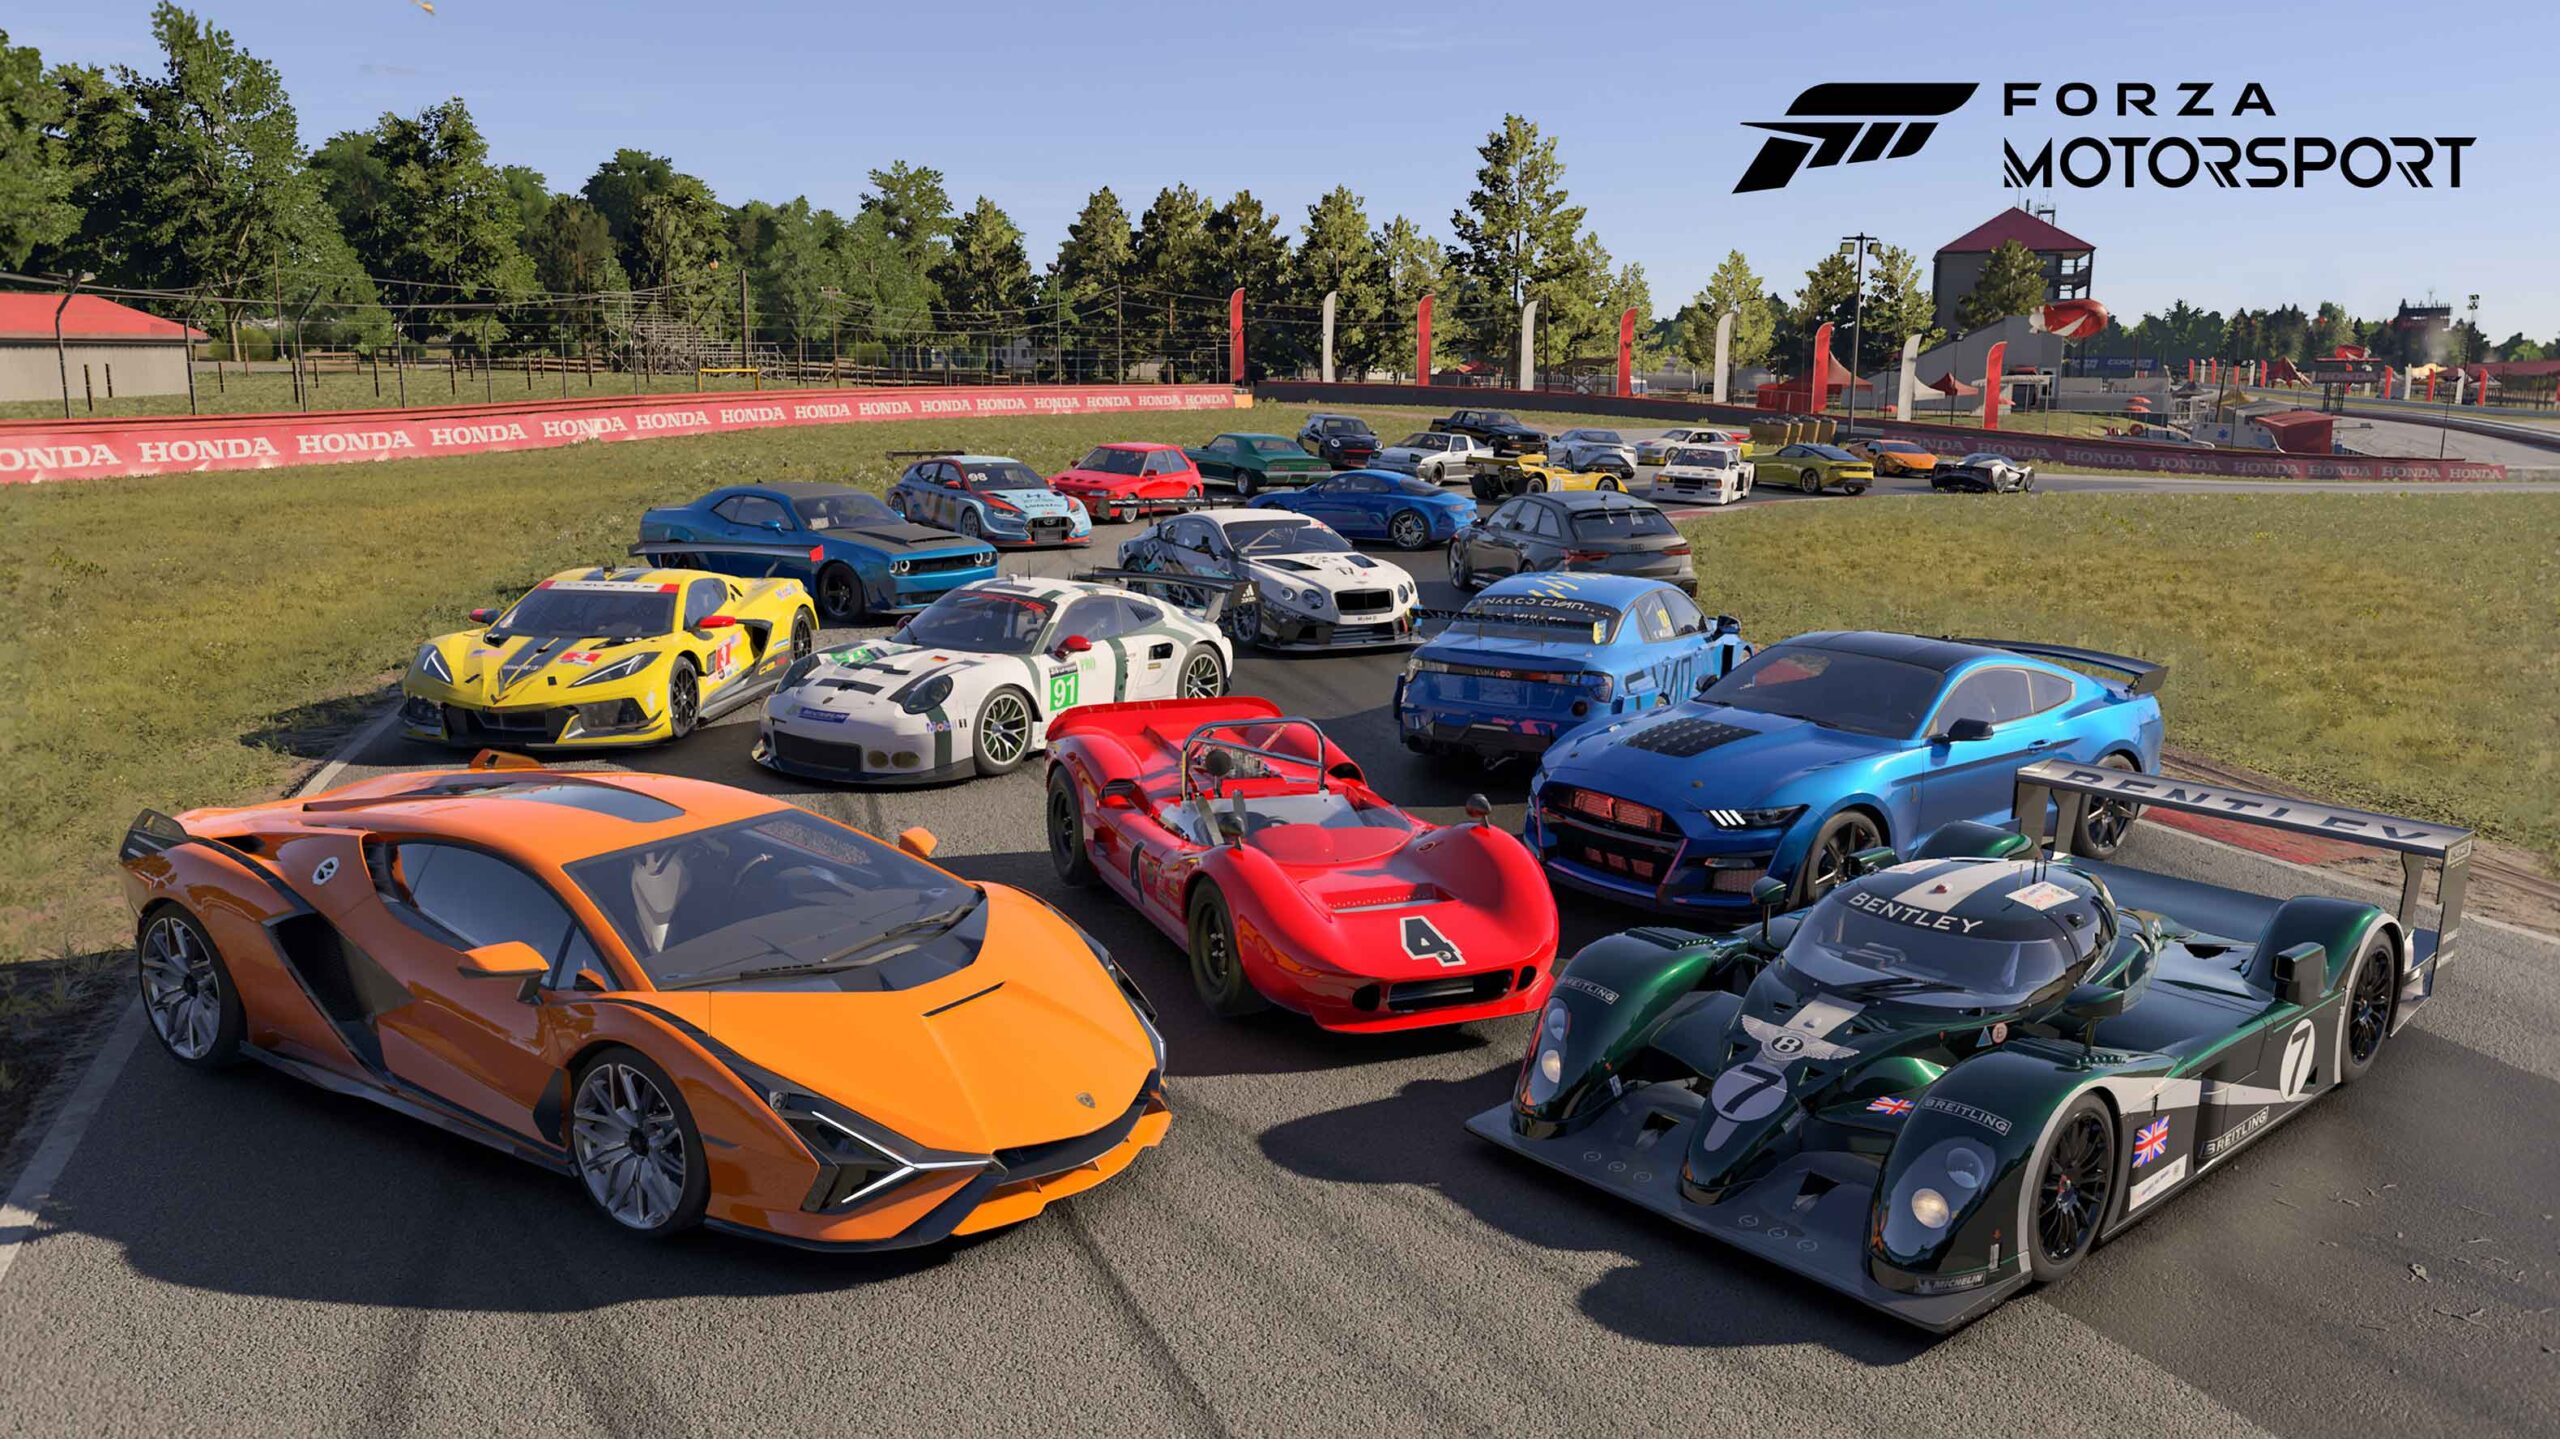 Xbox Forza Motorsport bunch of cars